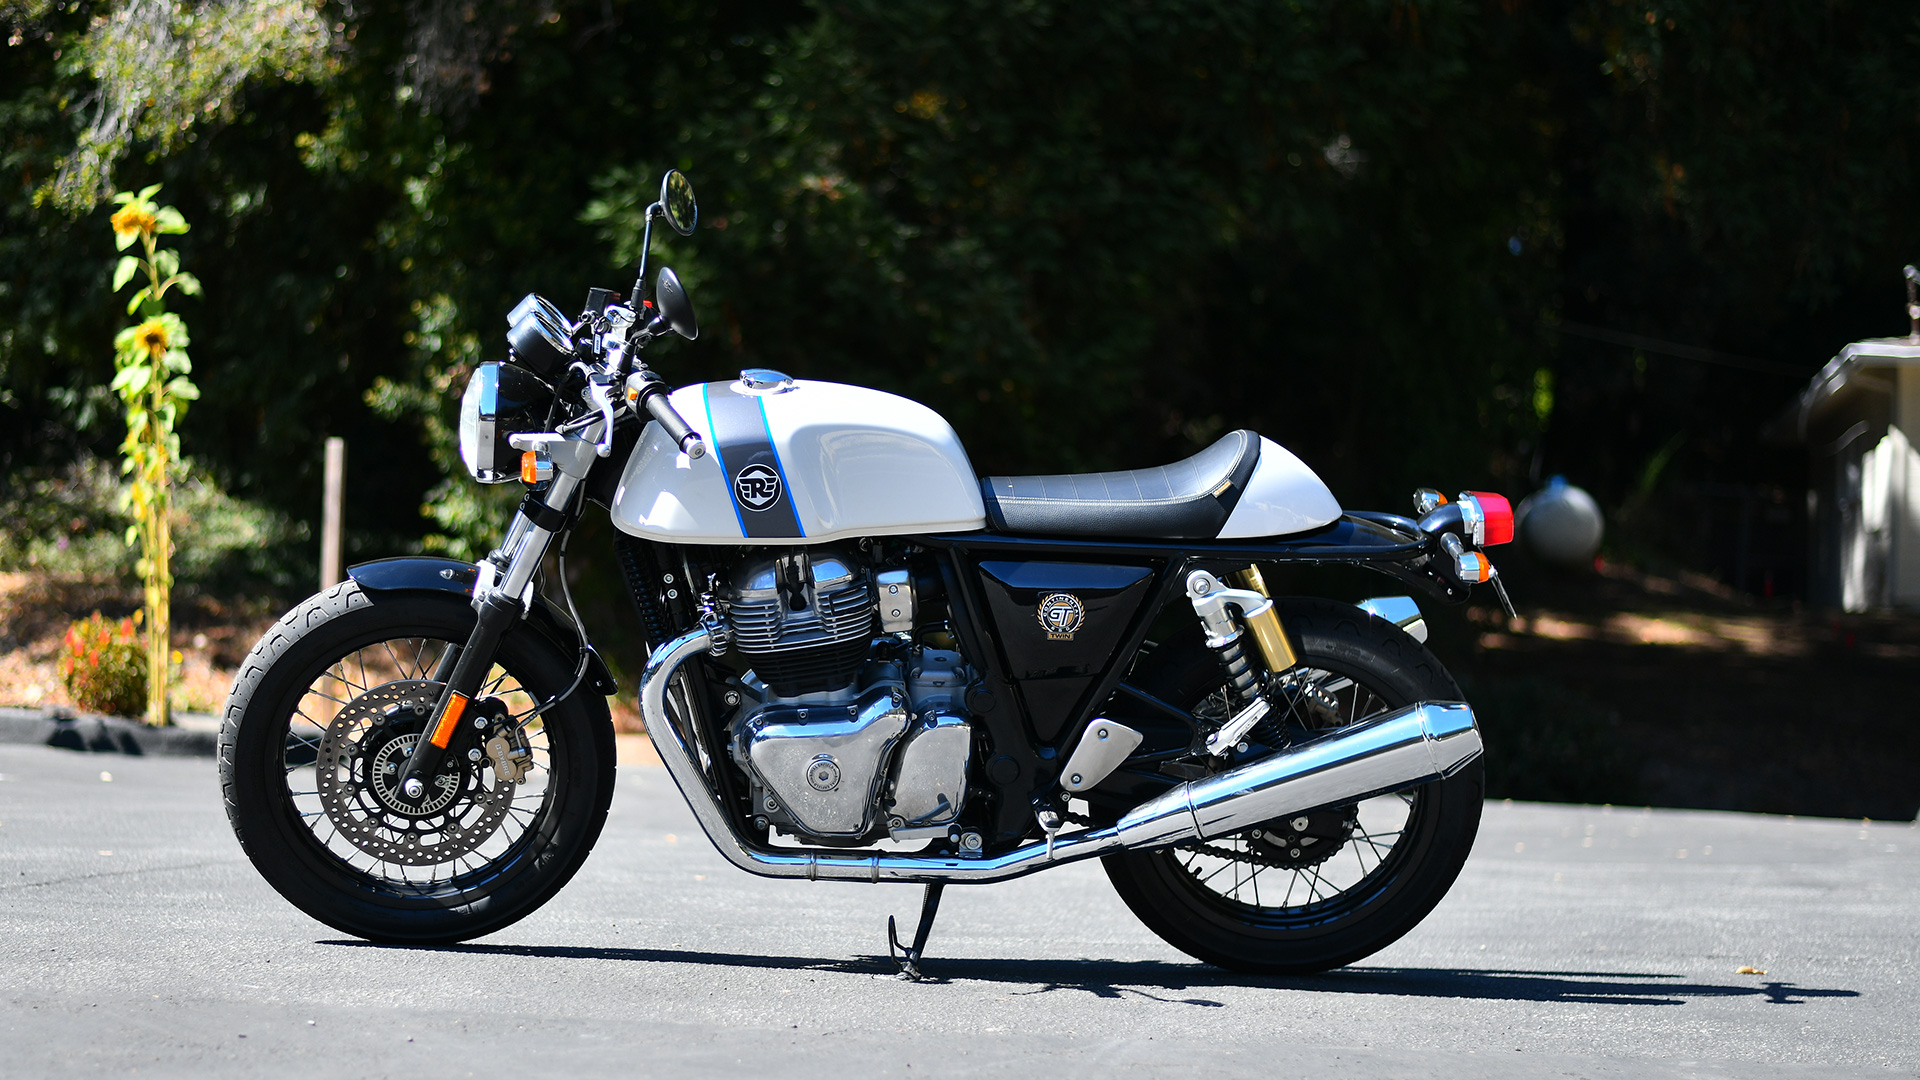 Royal Enfield Continental GT 650 2018 STD Bike Photos - Overdrive